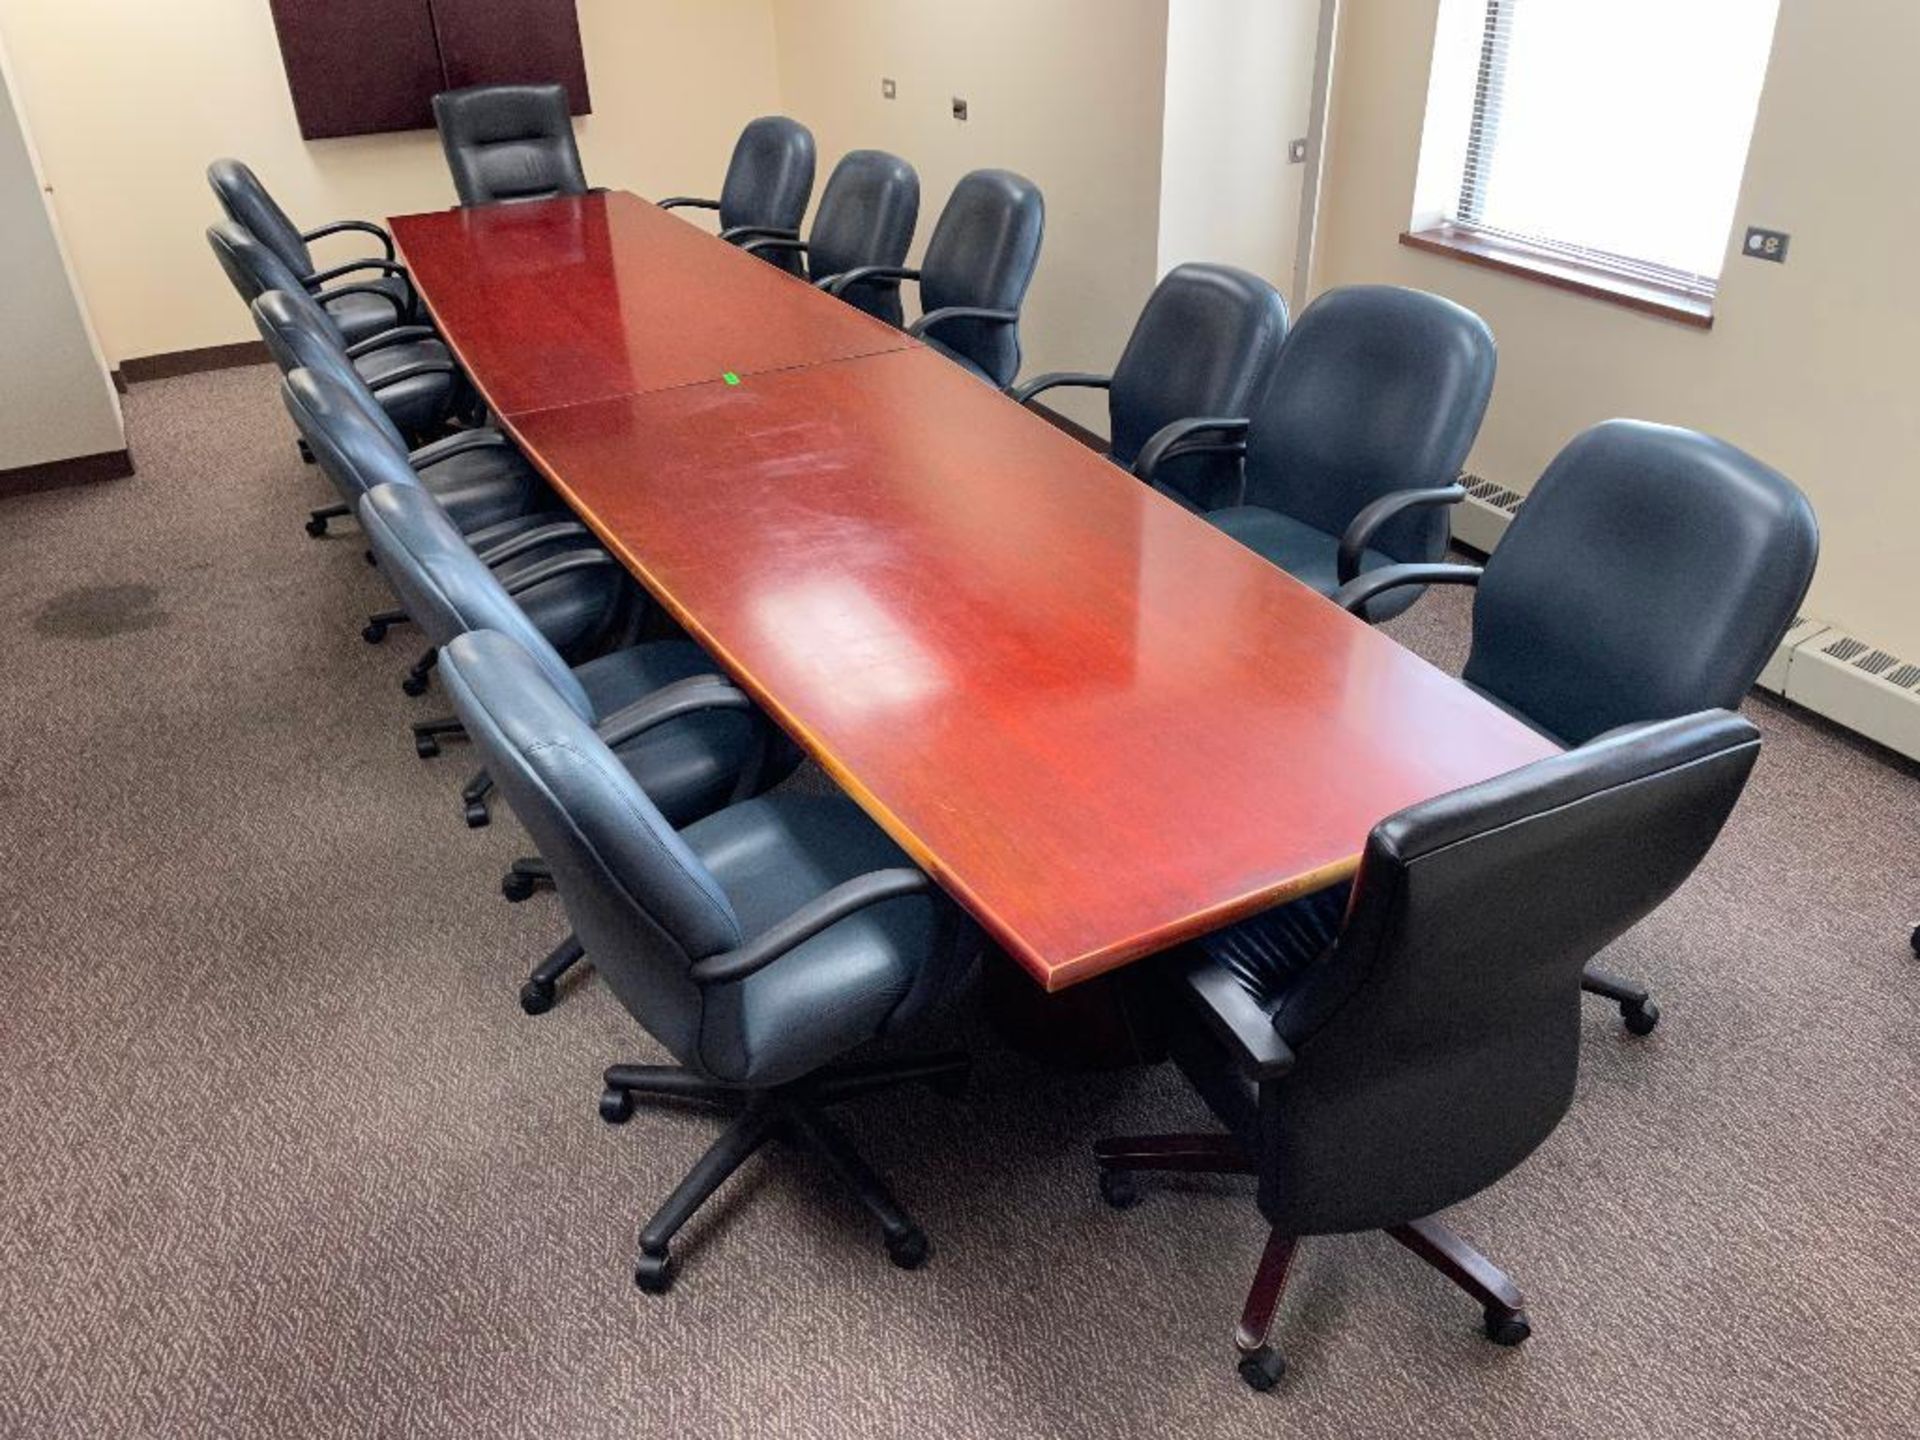 DESCRIPTION: 15 PC. COMPLETE CONFERENCE TABLE SET ADDITIONAL INFORMATION: TABLE AND 14 CHAIRS INCLUD